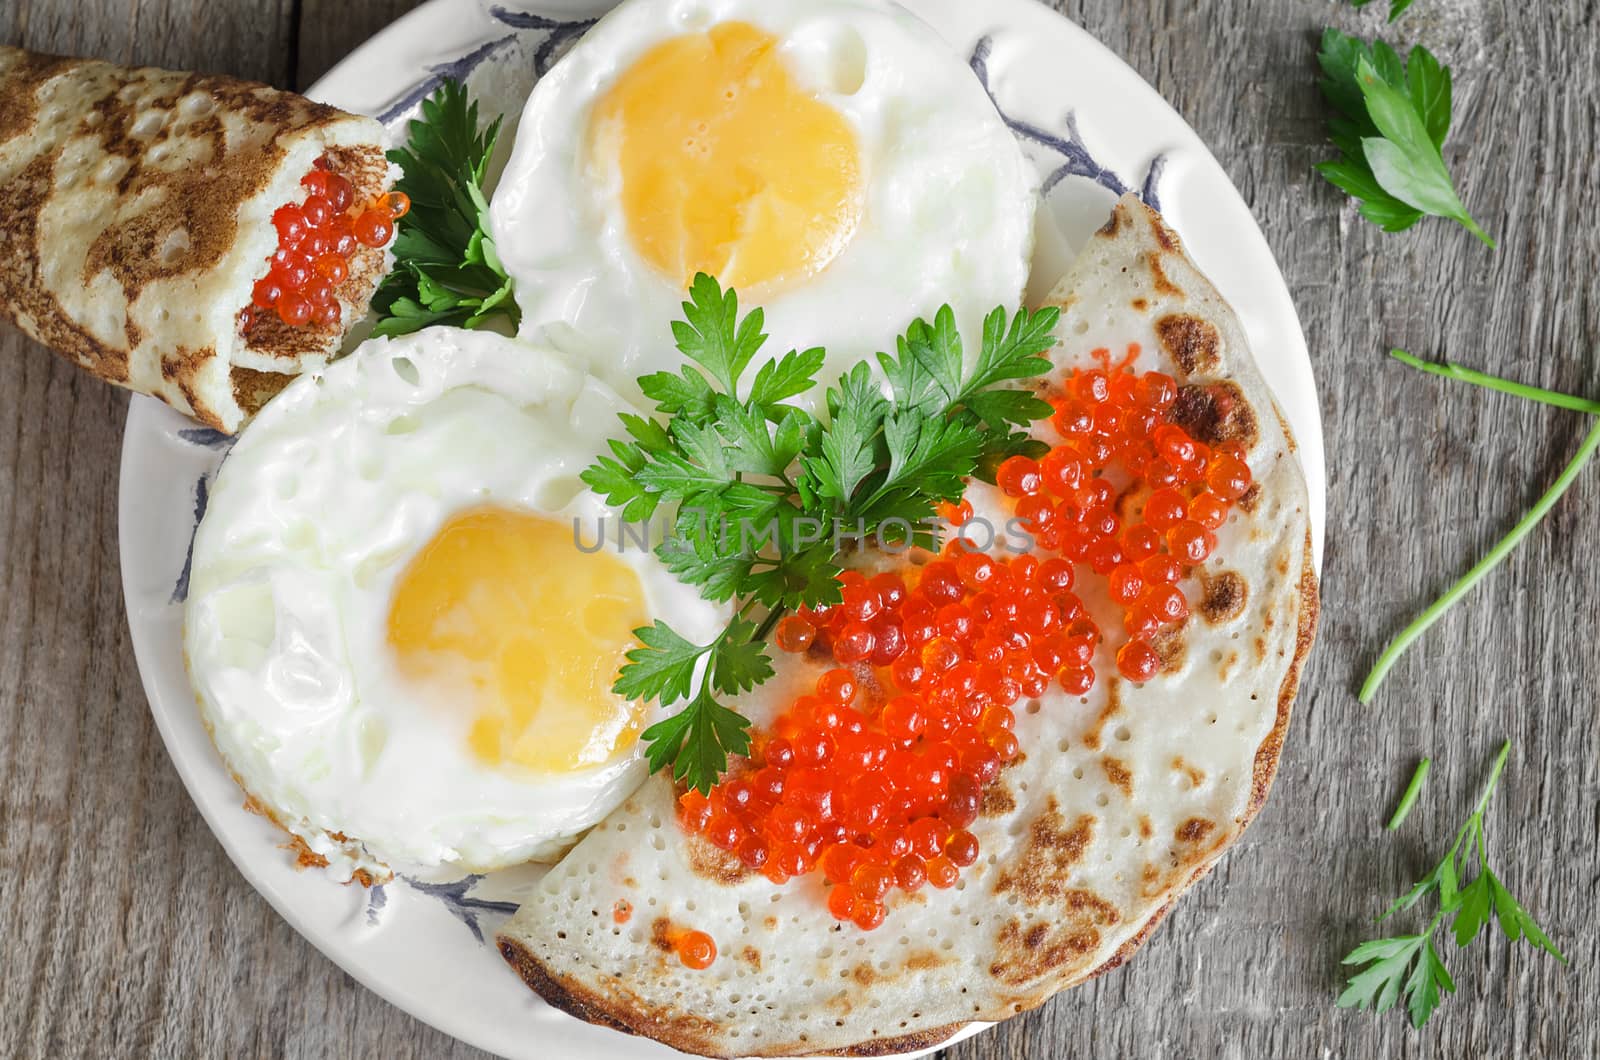 Scrambled eggs and pancakes with red caviar by Gaina